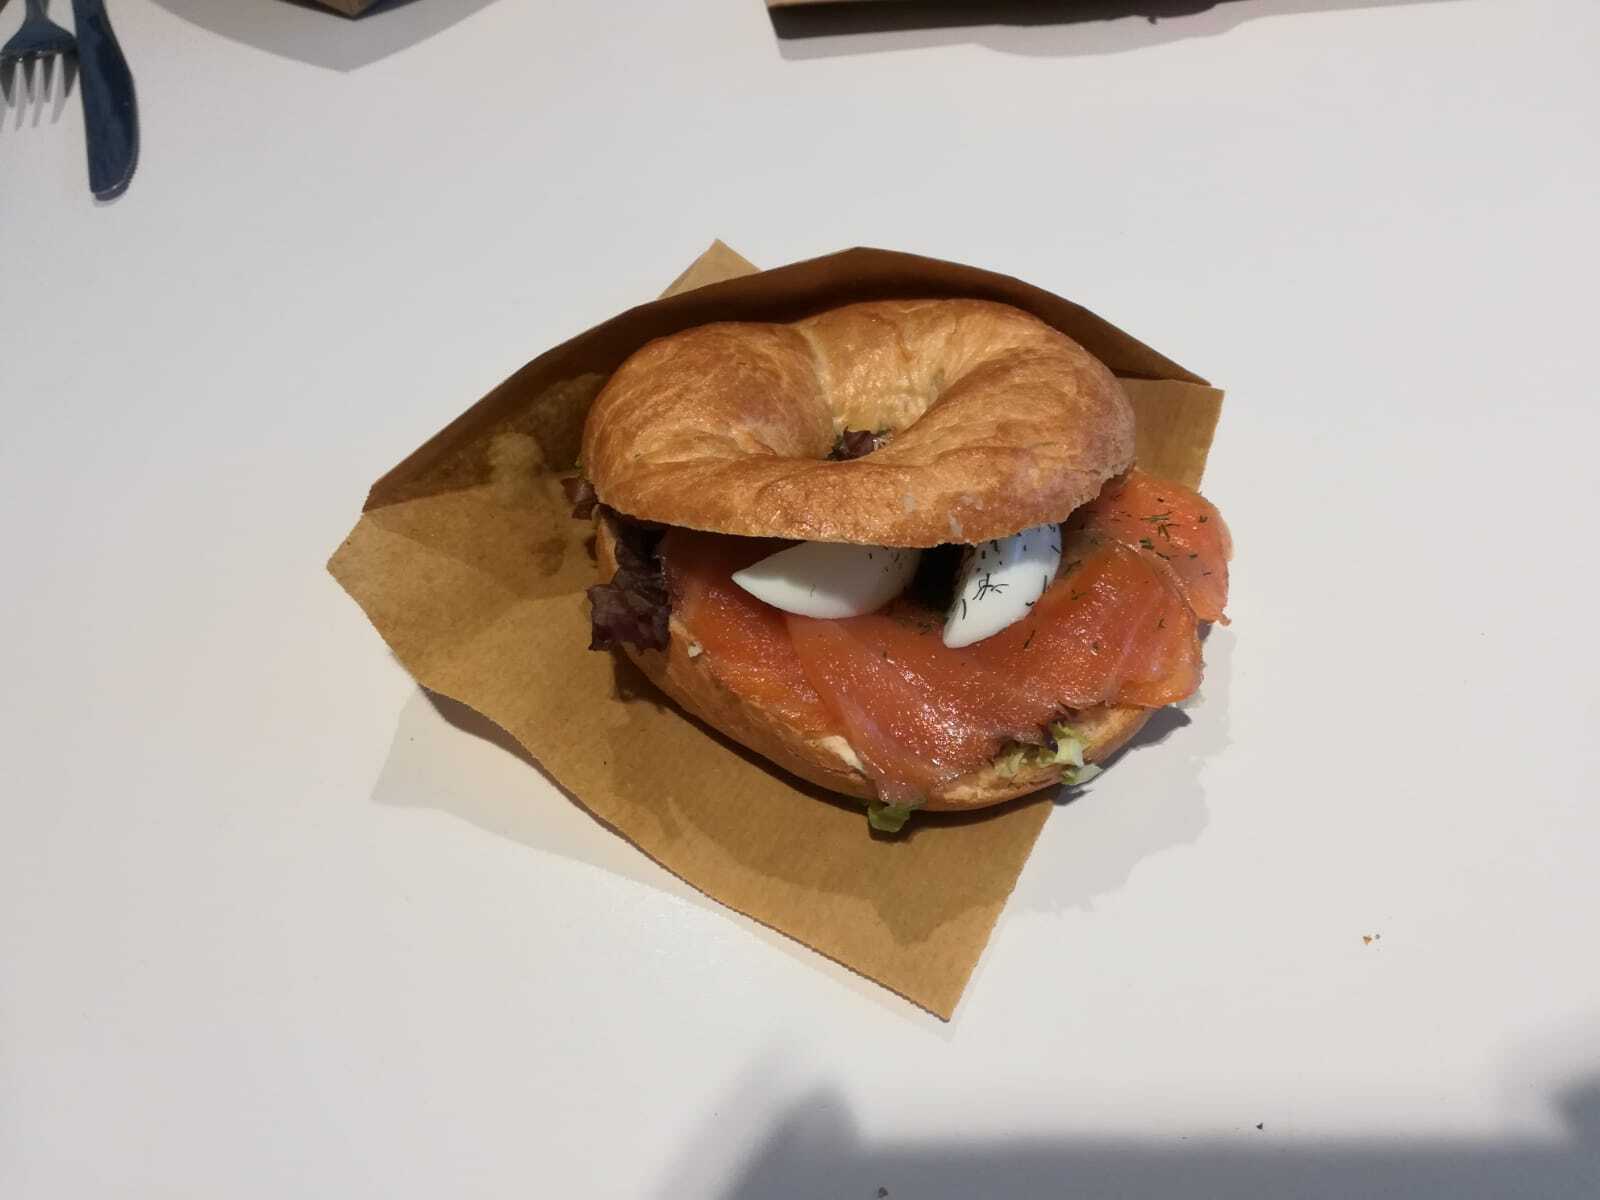 Figure 5: Photo of the Bagel